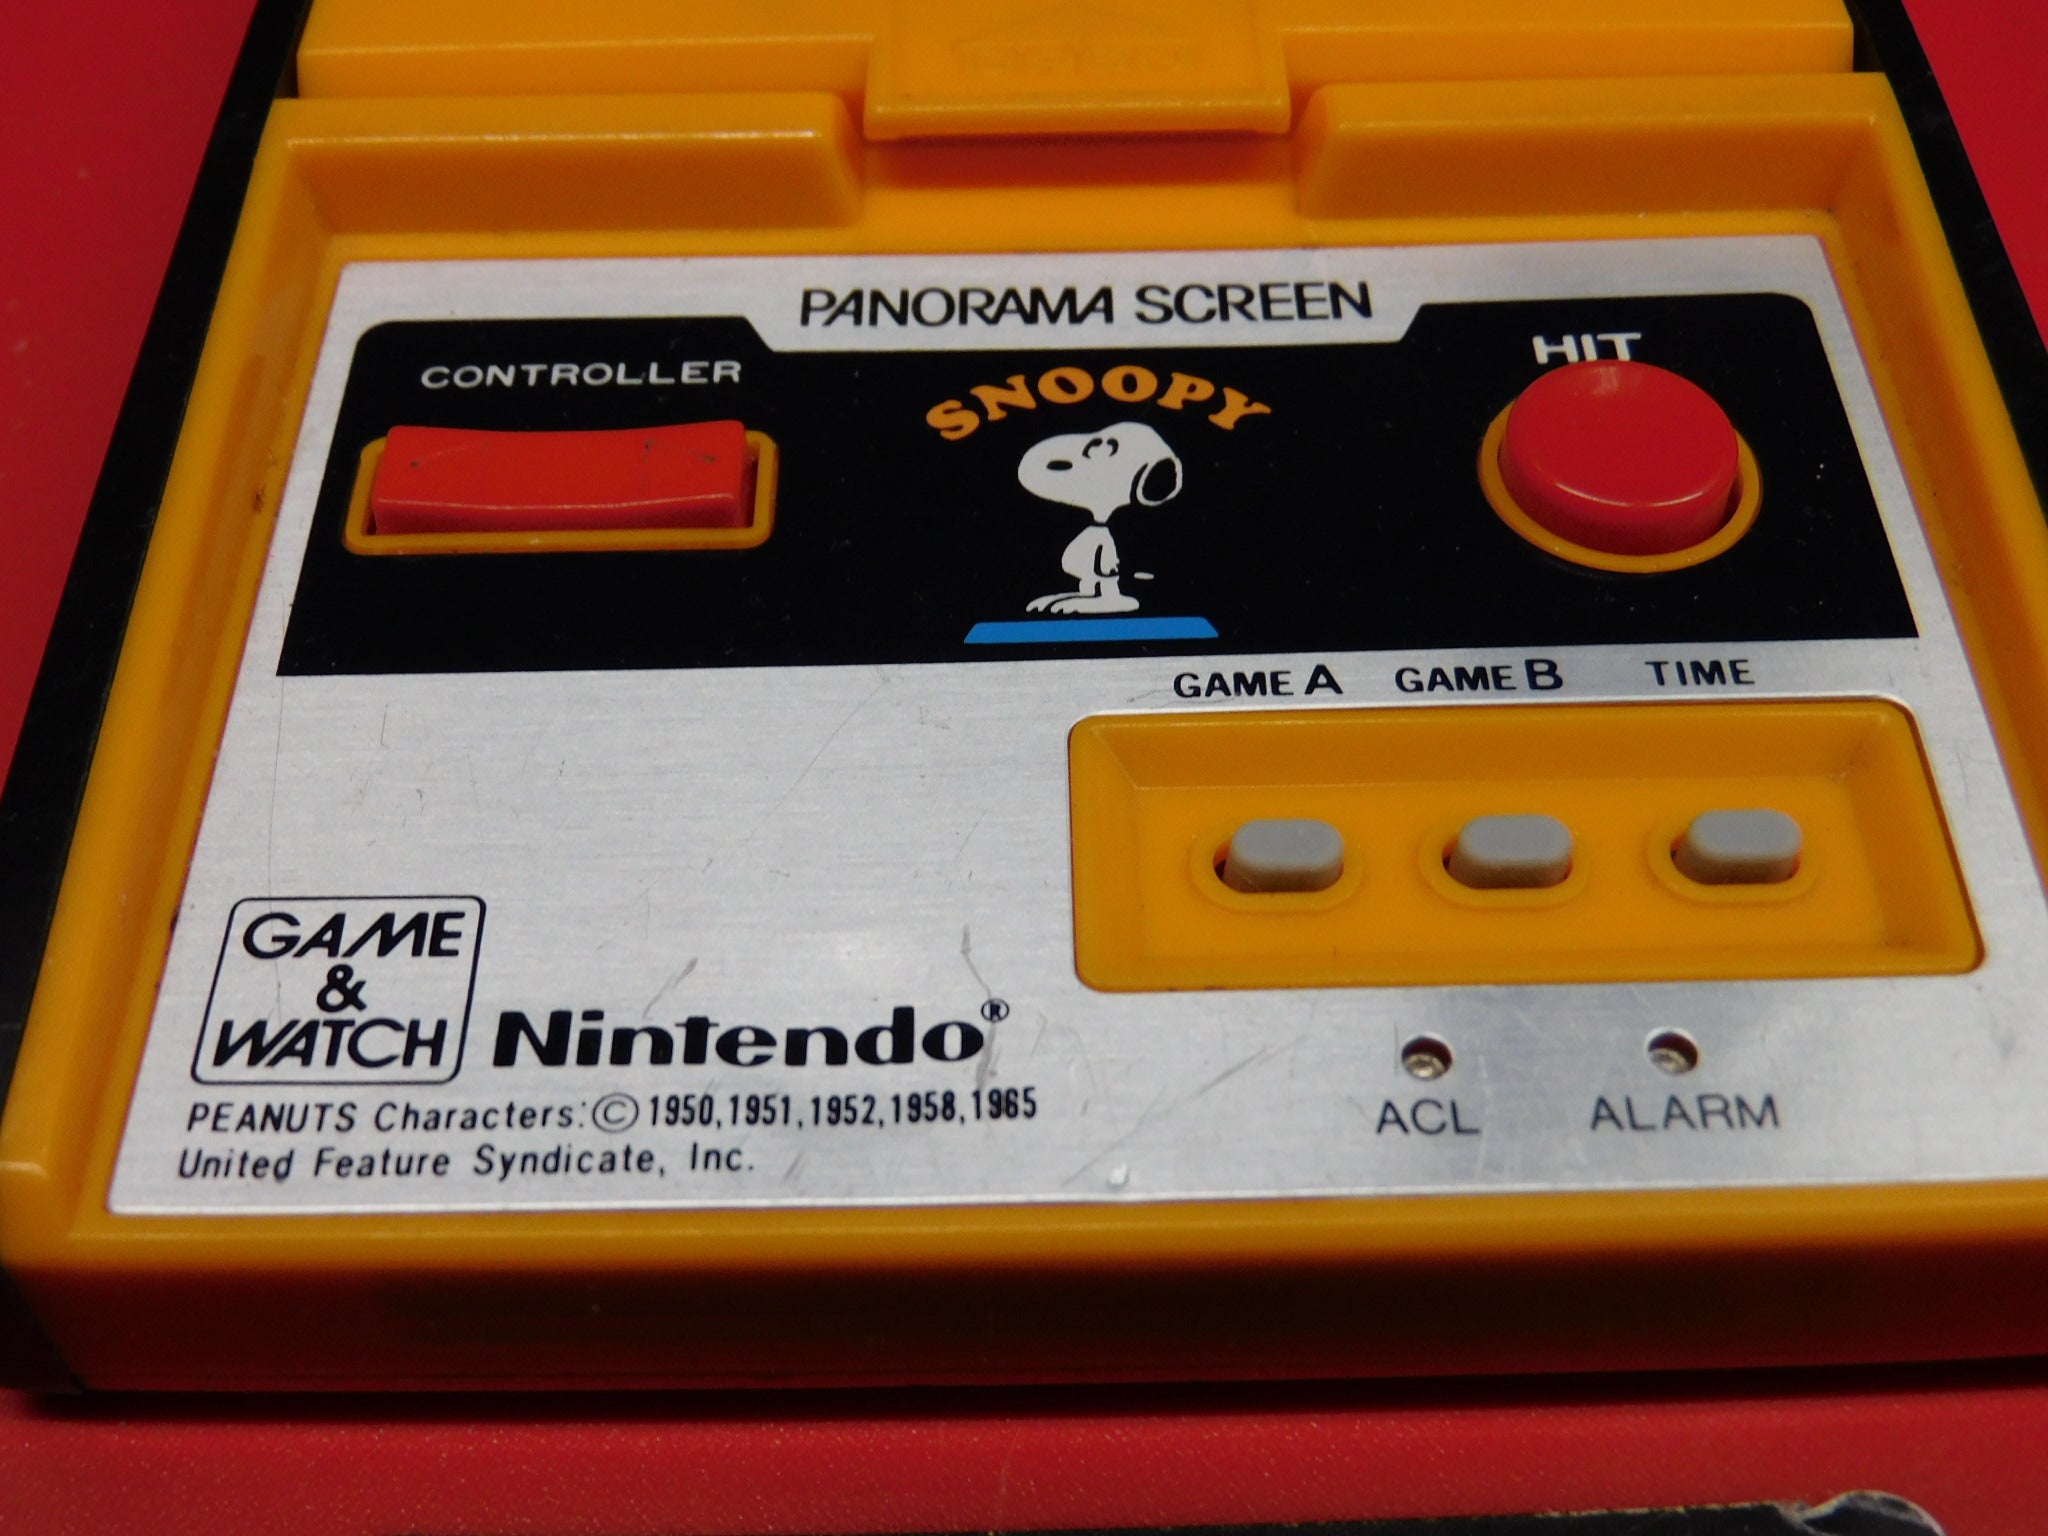 GAME & WATCH SNOOPY PANORAMA SCREEN